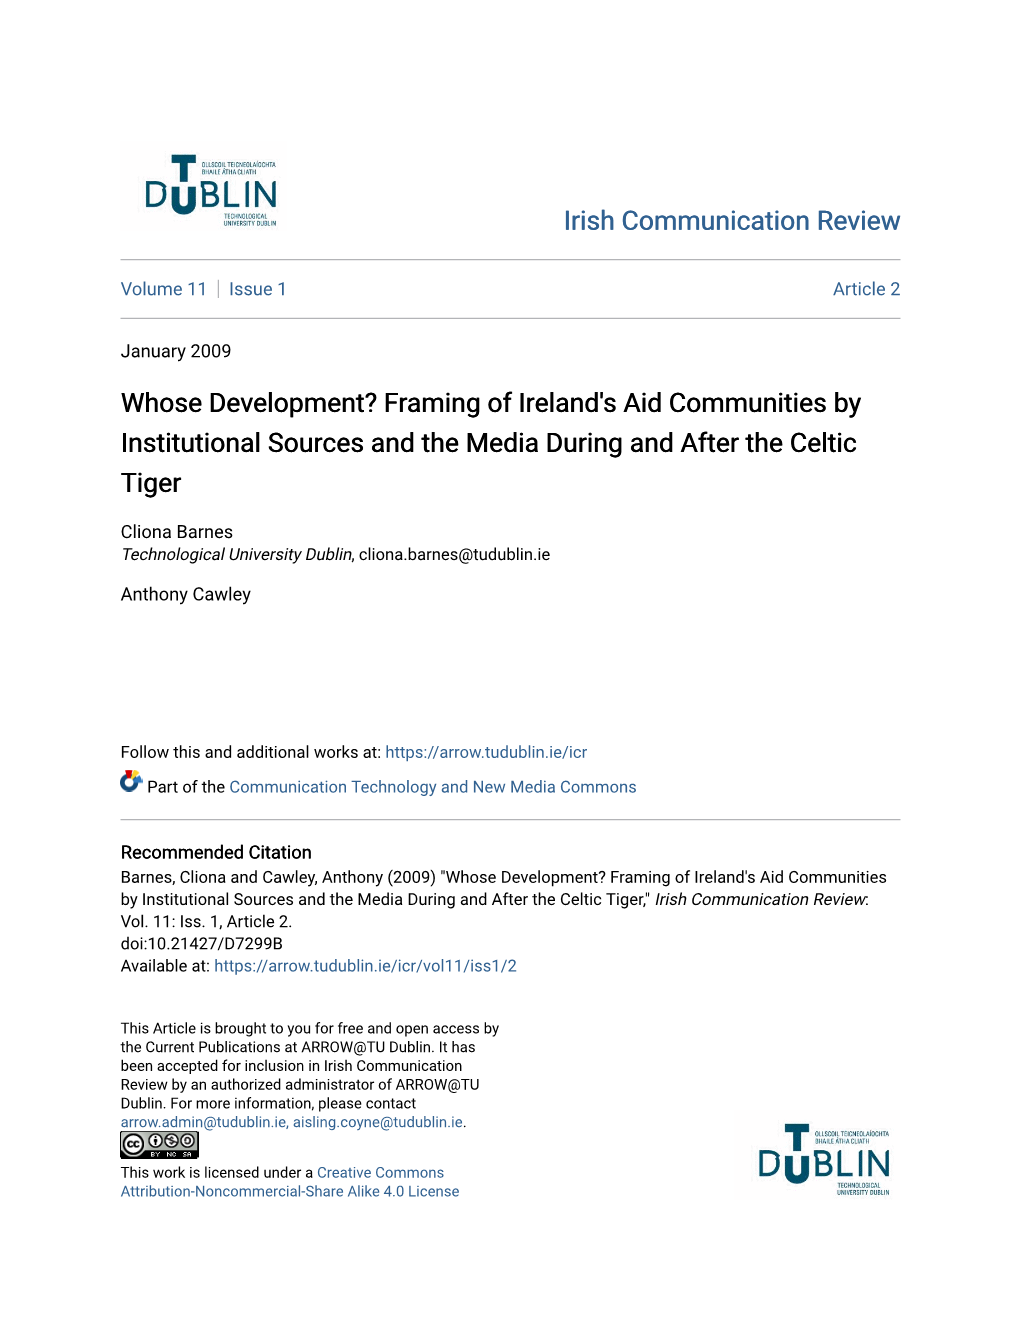 Framing of Ireland's Aid Communities by Institutional Sources and the Media During and After the Celtic Tiger